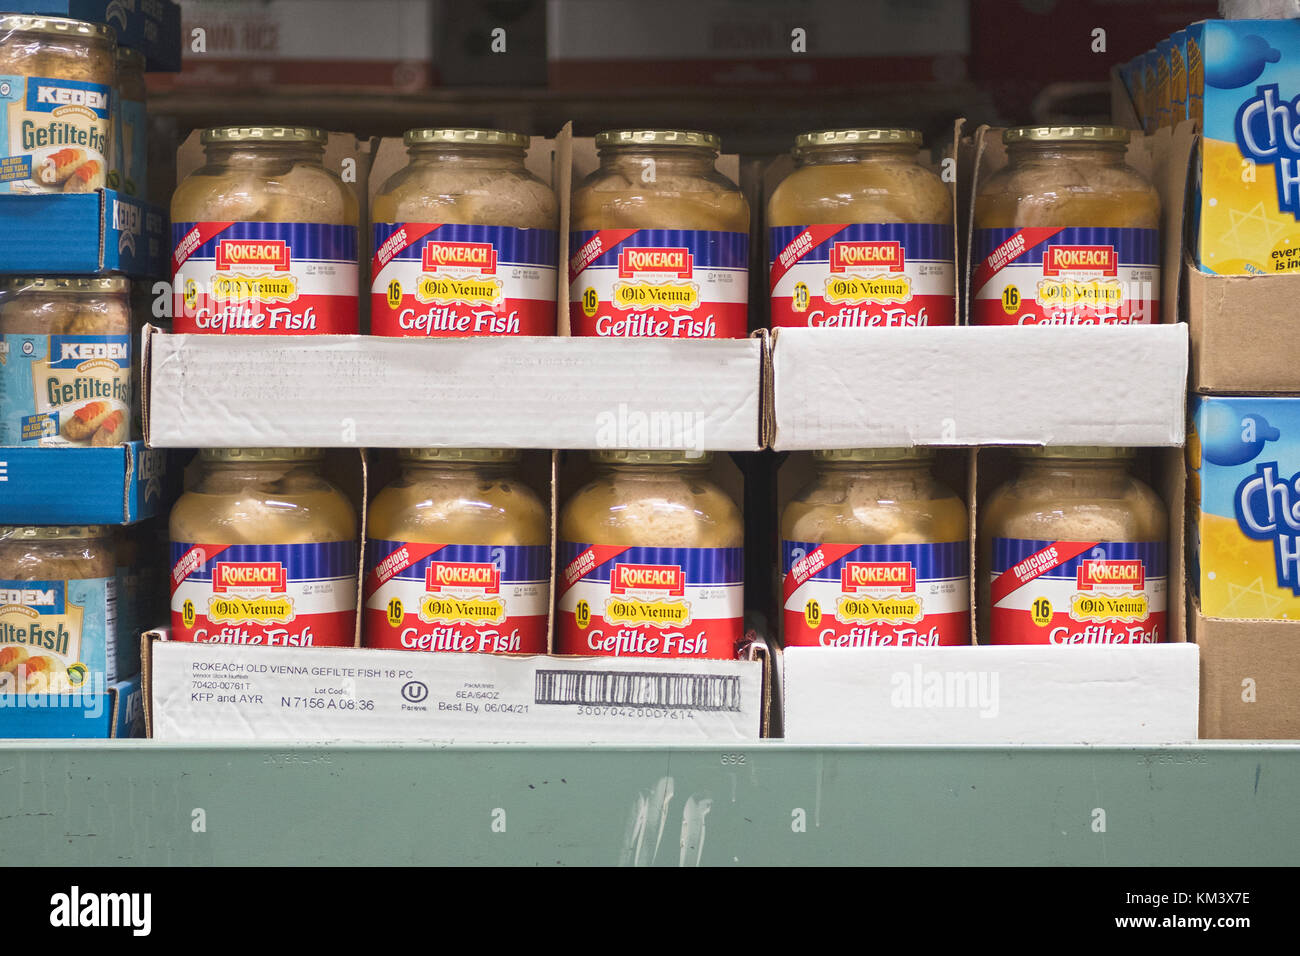 Large jars of Rokeach Gefilte Fish for sale at BJ's Wholesale Club in Whitestone, Queens, New York. Stock Photo